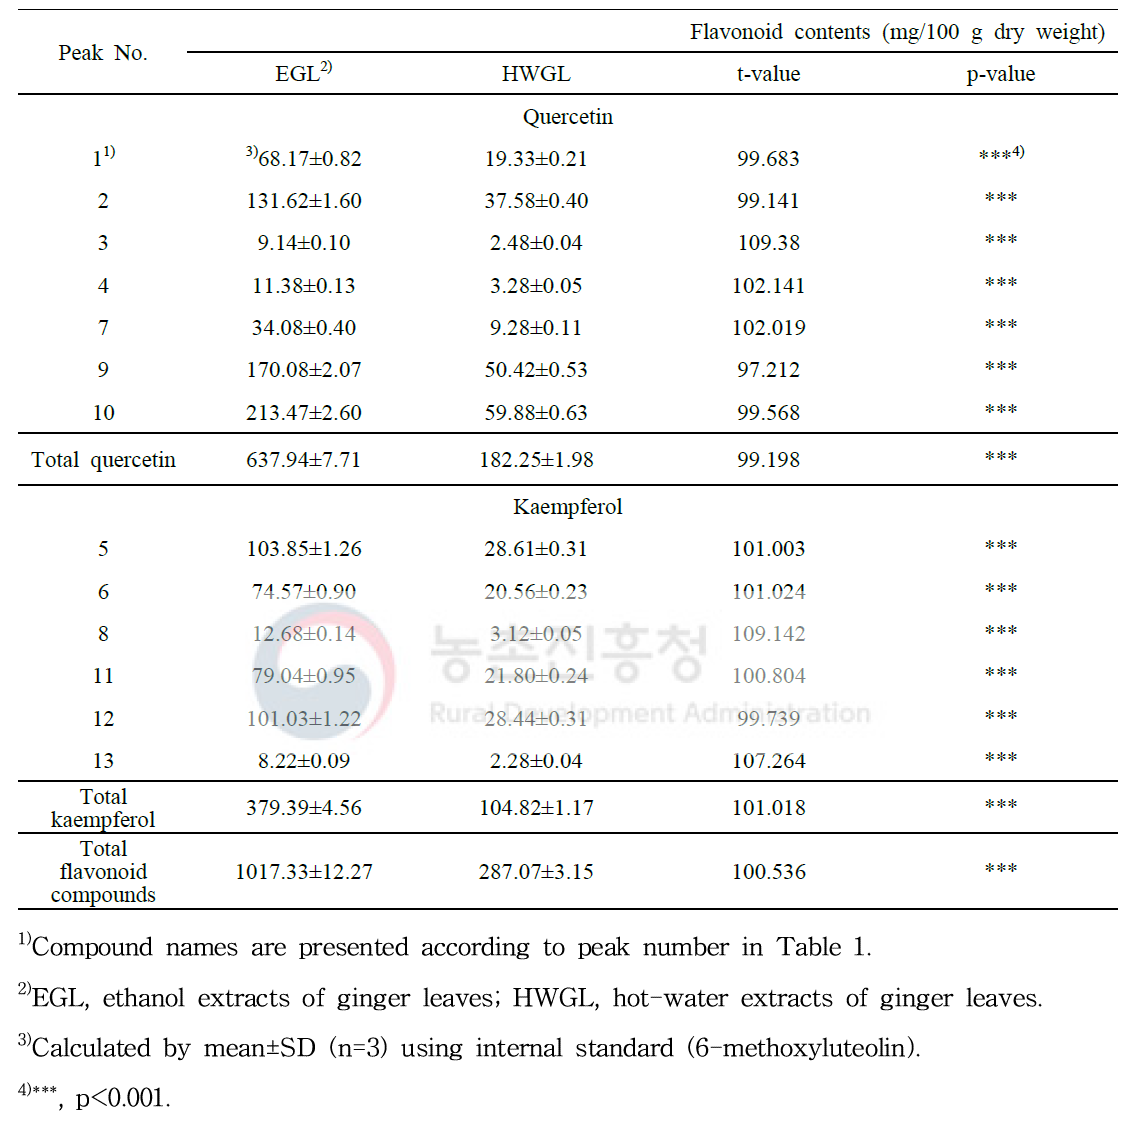 Contents (mg/100 g dry weight) of isolated 13 flavonol glycosides in leaves of cultivated in Korean ginger